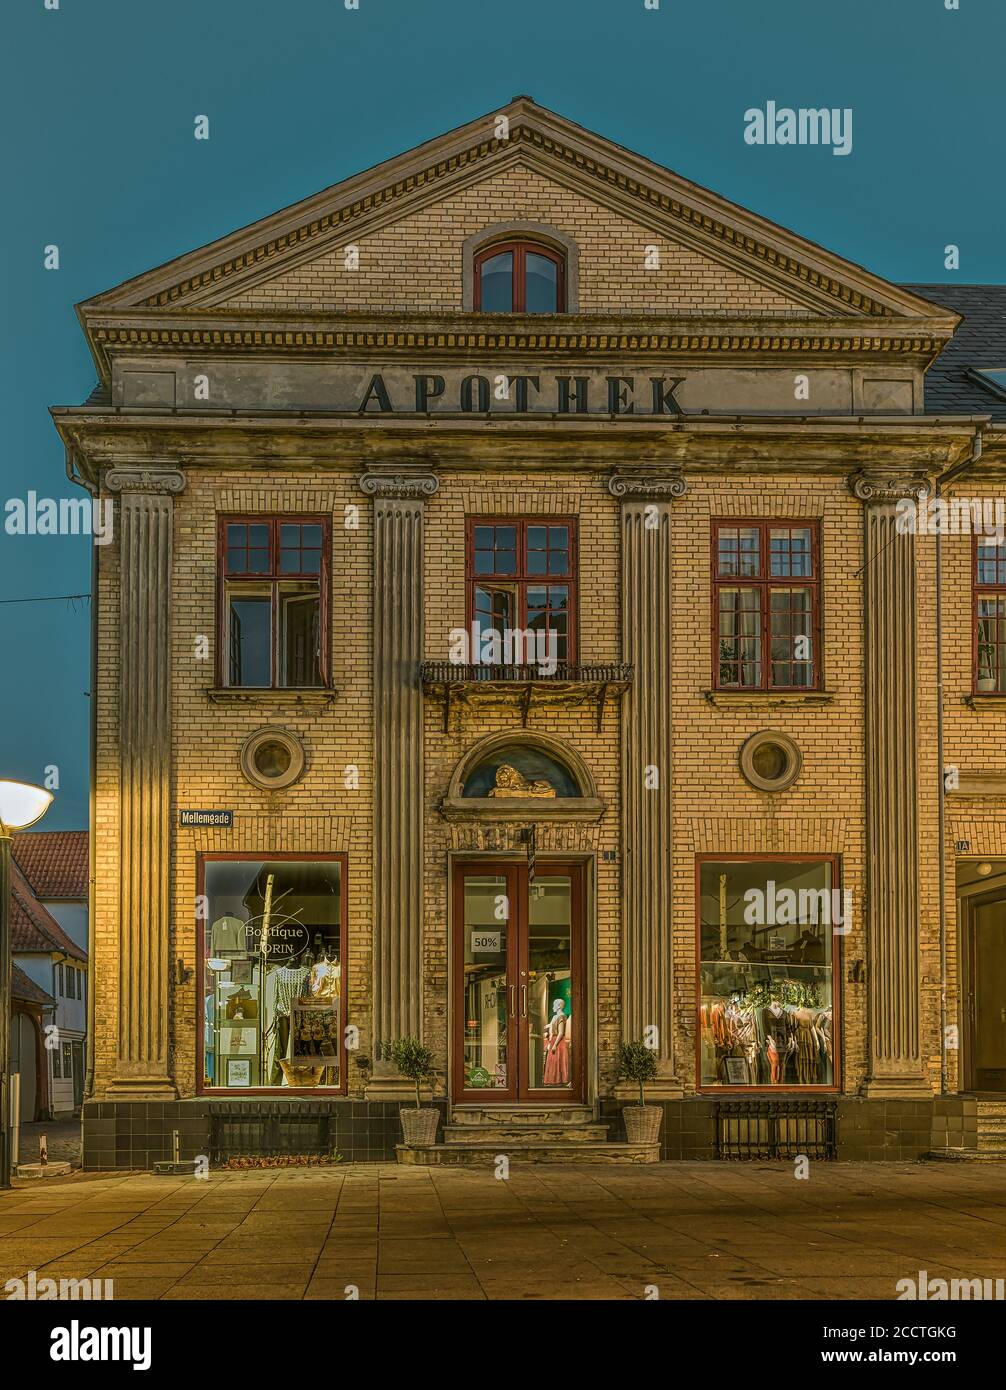 Lion Pharmacy with an ancient greek facade with columns in ionic order, Faaborg, Denmark, August 17, 2020 Stock Photo